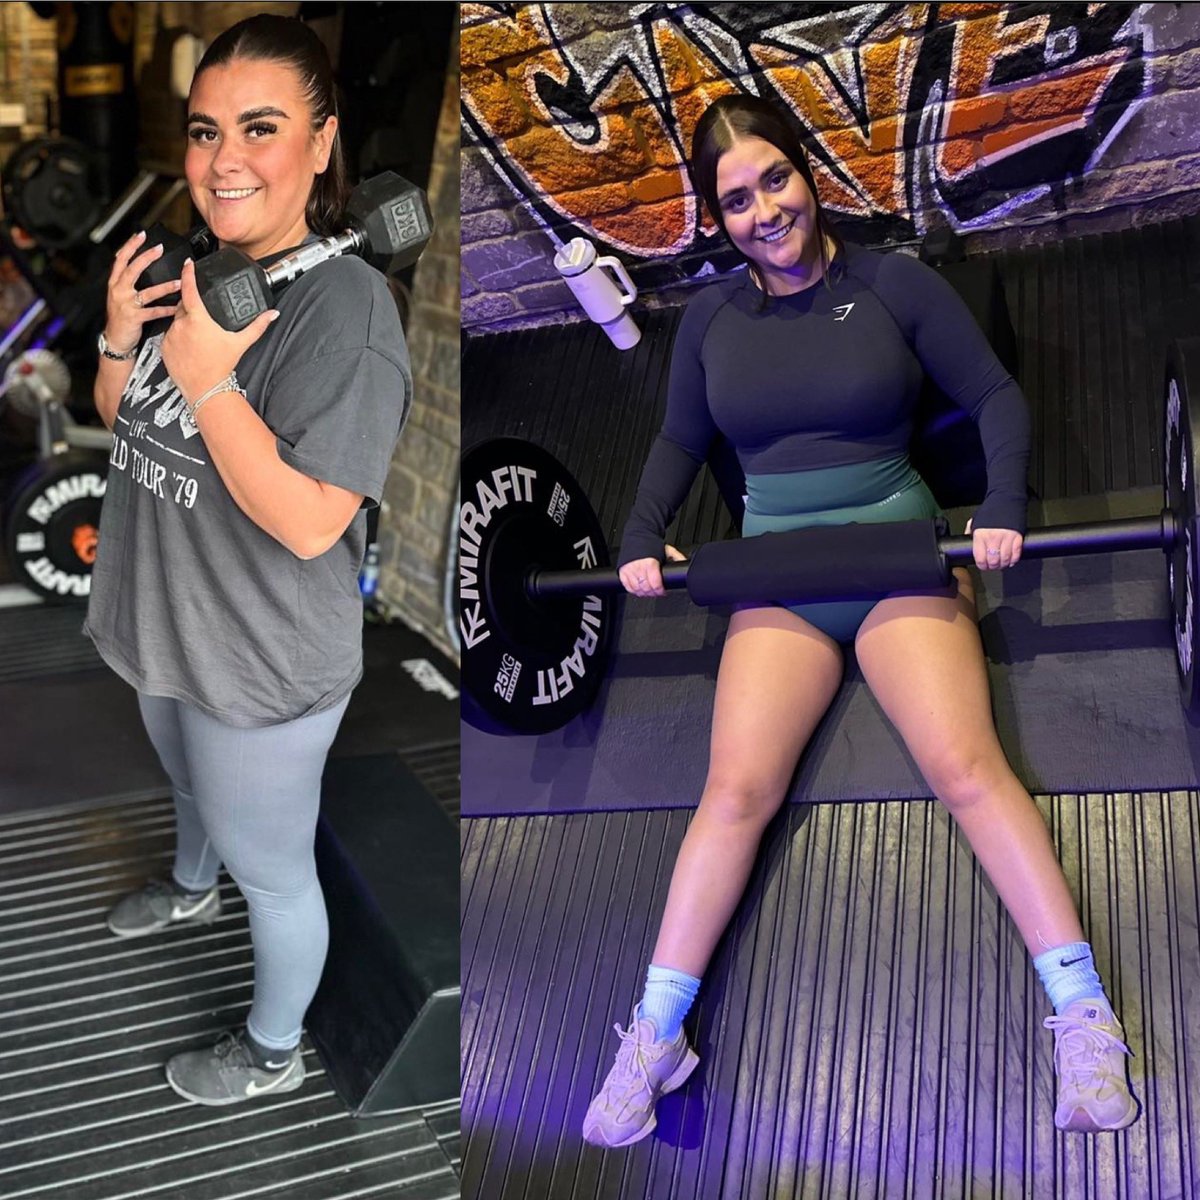 Buffing bufftastic buffer Megan Addy looking absolutely amazing after a few brutal legs and glutes personal training sessions at Buffmaster Home Personal Training. 💪👊🔥 #fatloss #fatlossjourney #bodytransformation #buffmasterhybridtraining #teambuffmaster #buffcave #gym